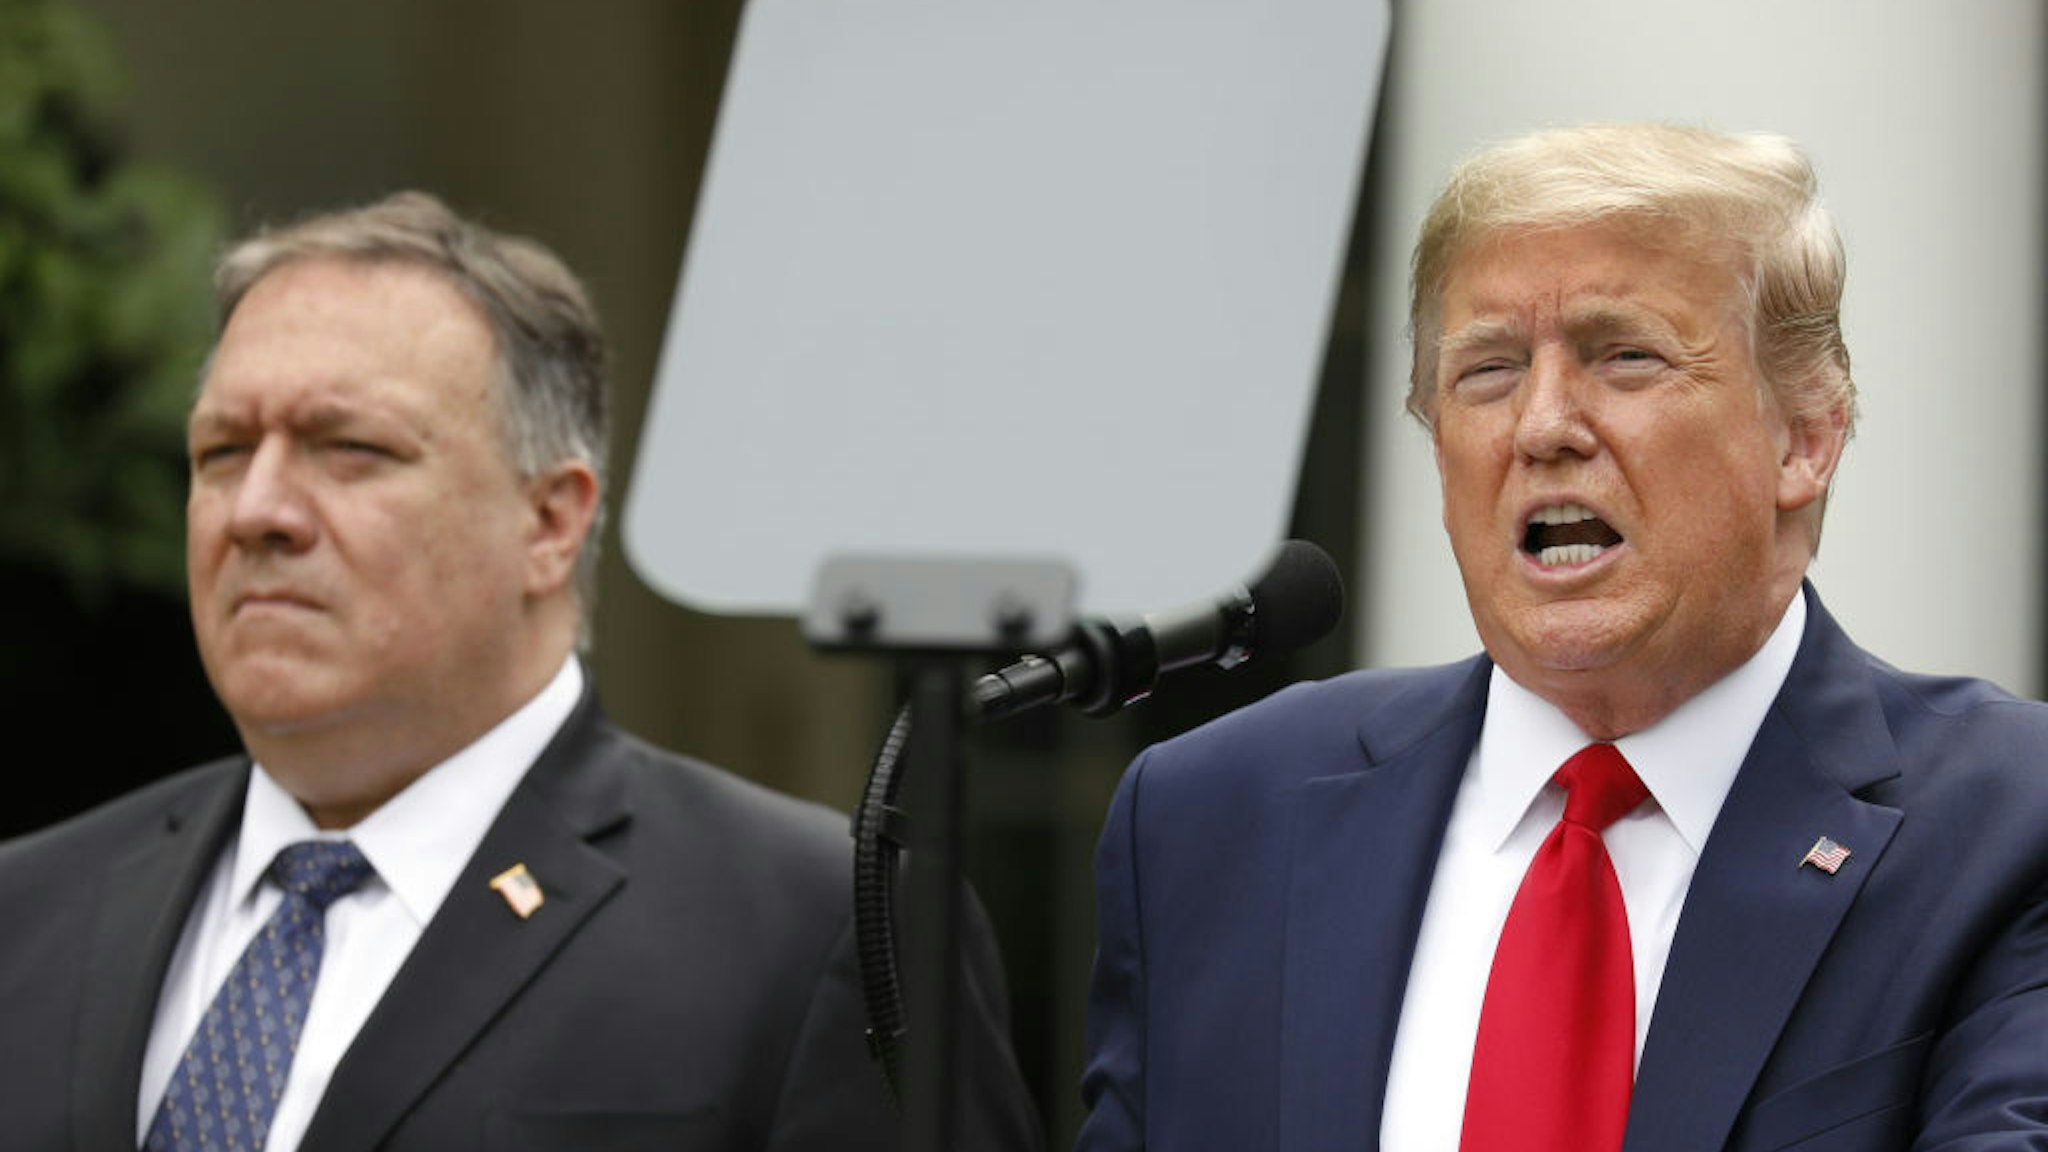 U.S. President Donald Trump speaks as Mike Pompeo, U.S. secretary of state, left, listens during a news conference in the Rose Garden of the White House in Washington, D.C., U.S., on Friday, May 29, 2020.